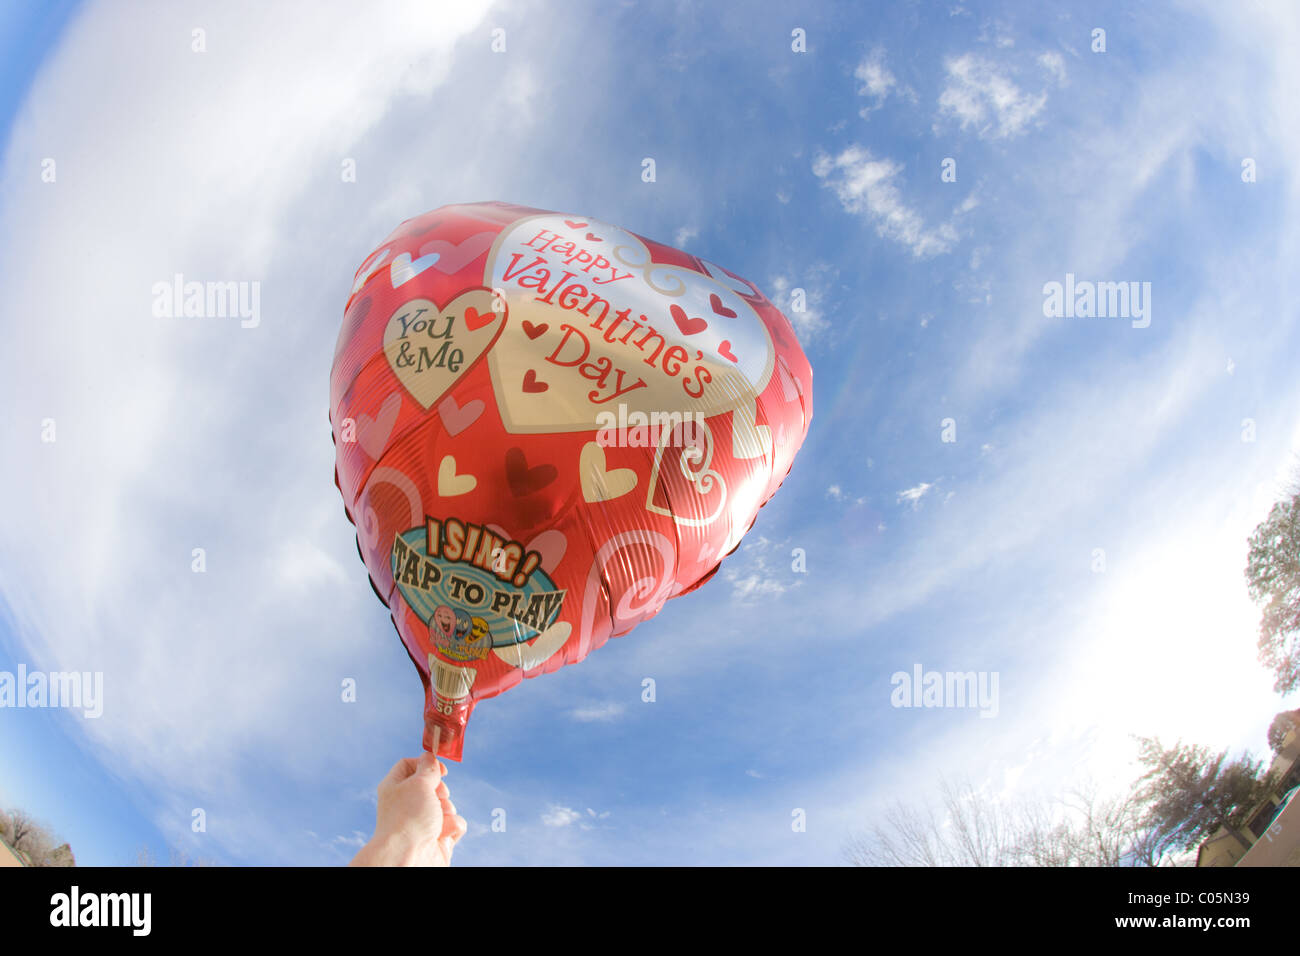 Happy Valentines Day helium balloon with blue sky, heart shapes 'singing balloon' -sings a song when you touch balloon. Stock Photo